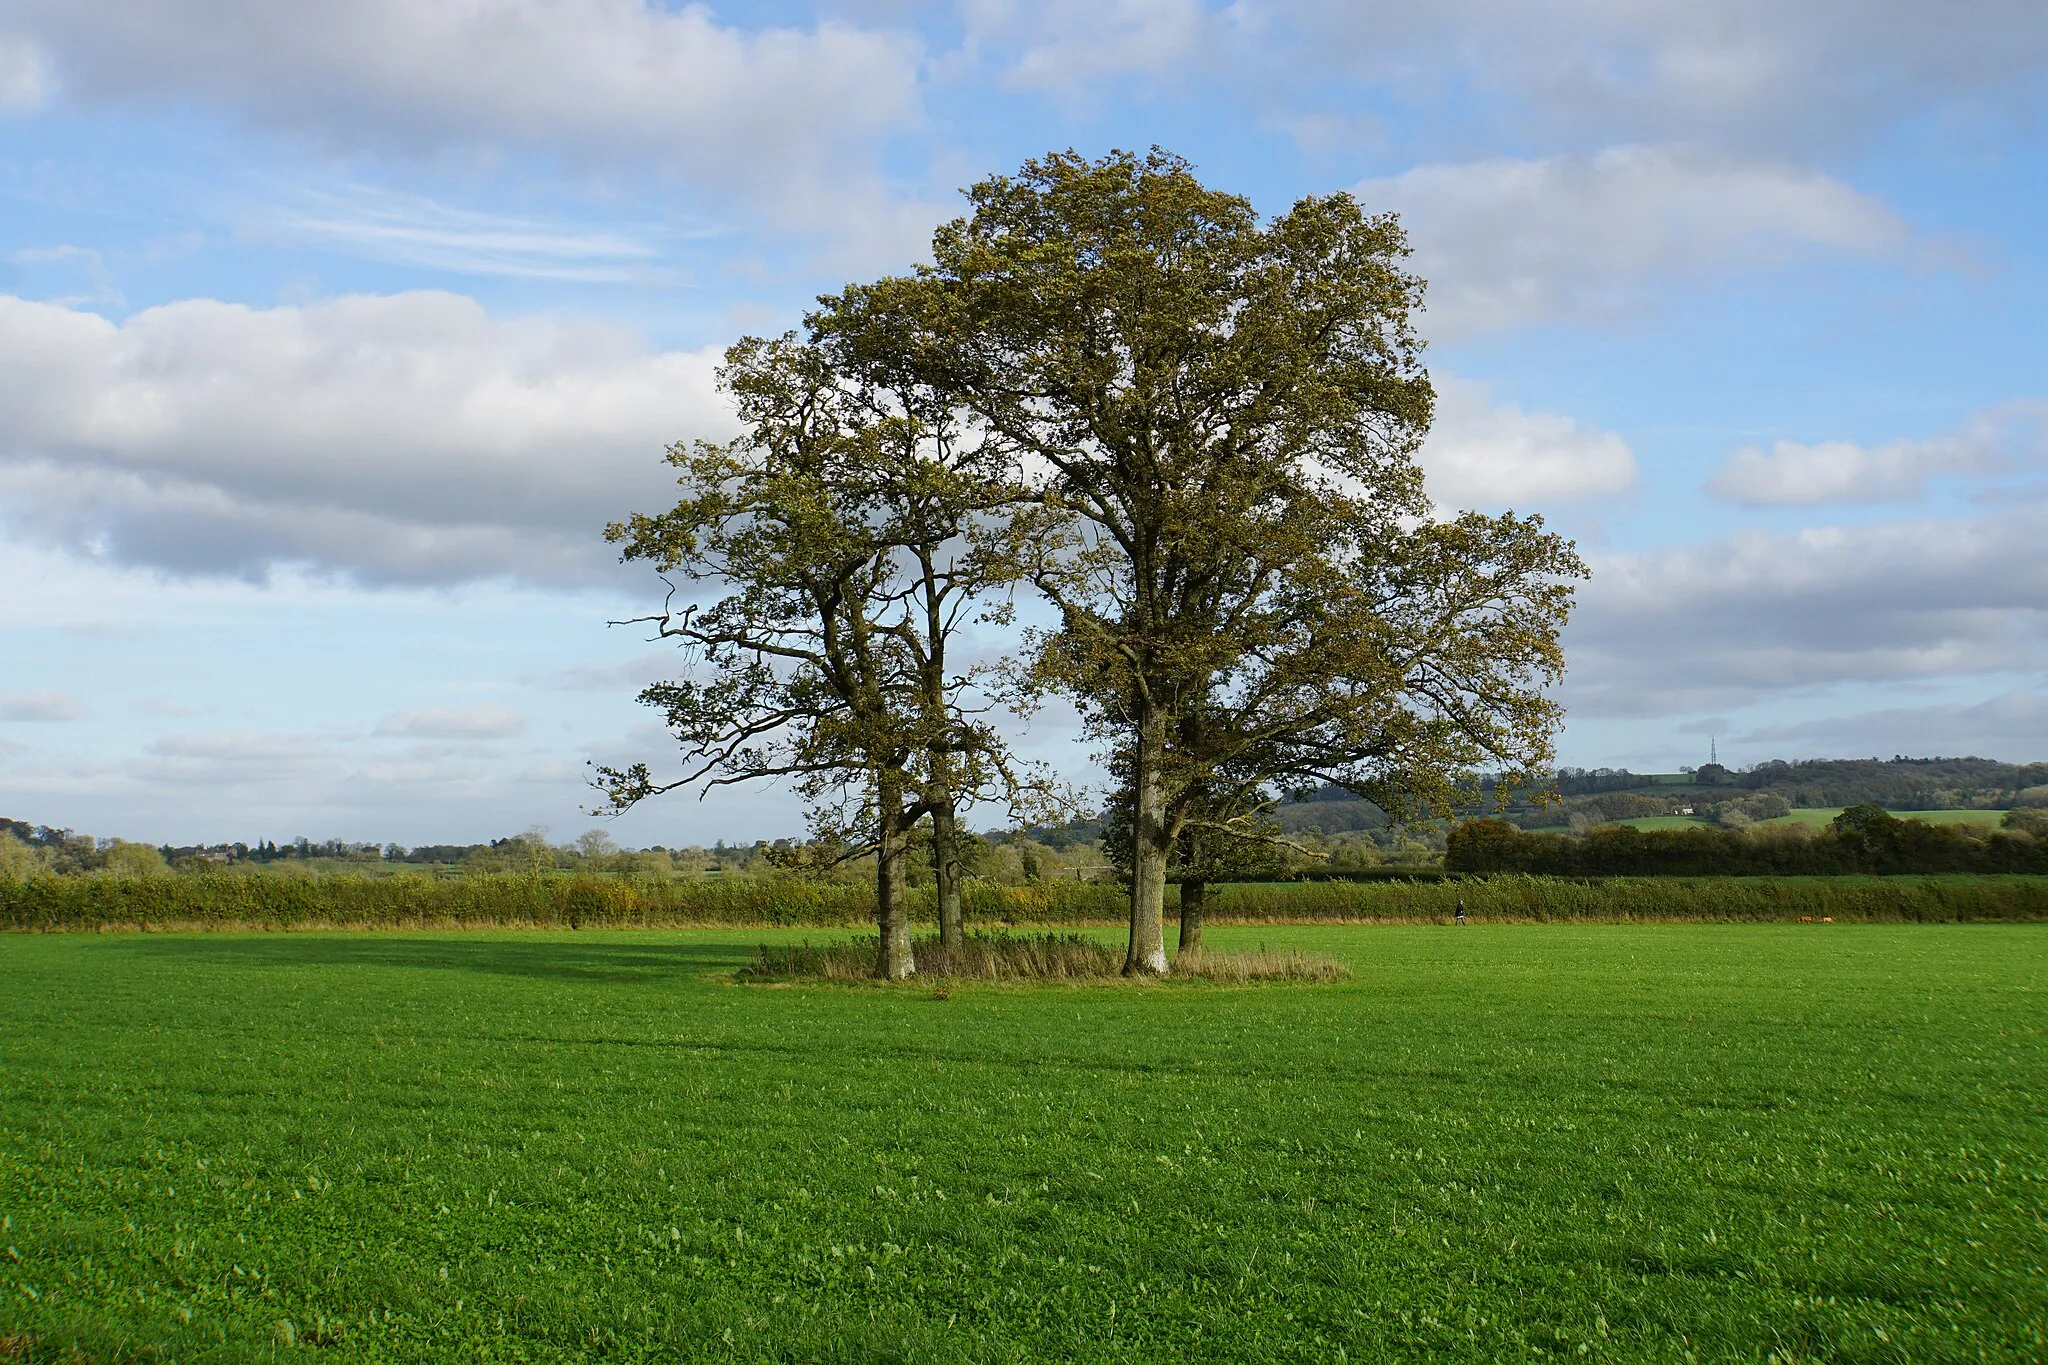 Photo showing: A stand of trees in a field